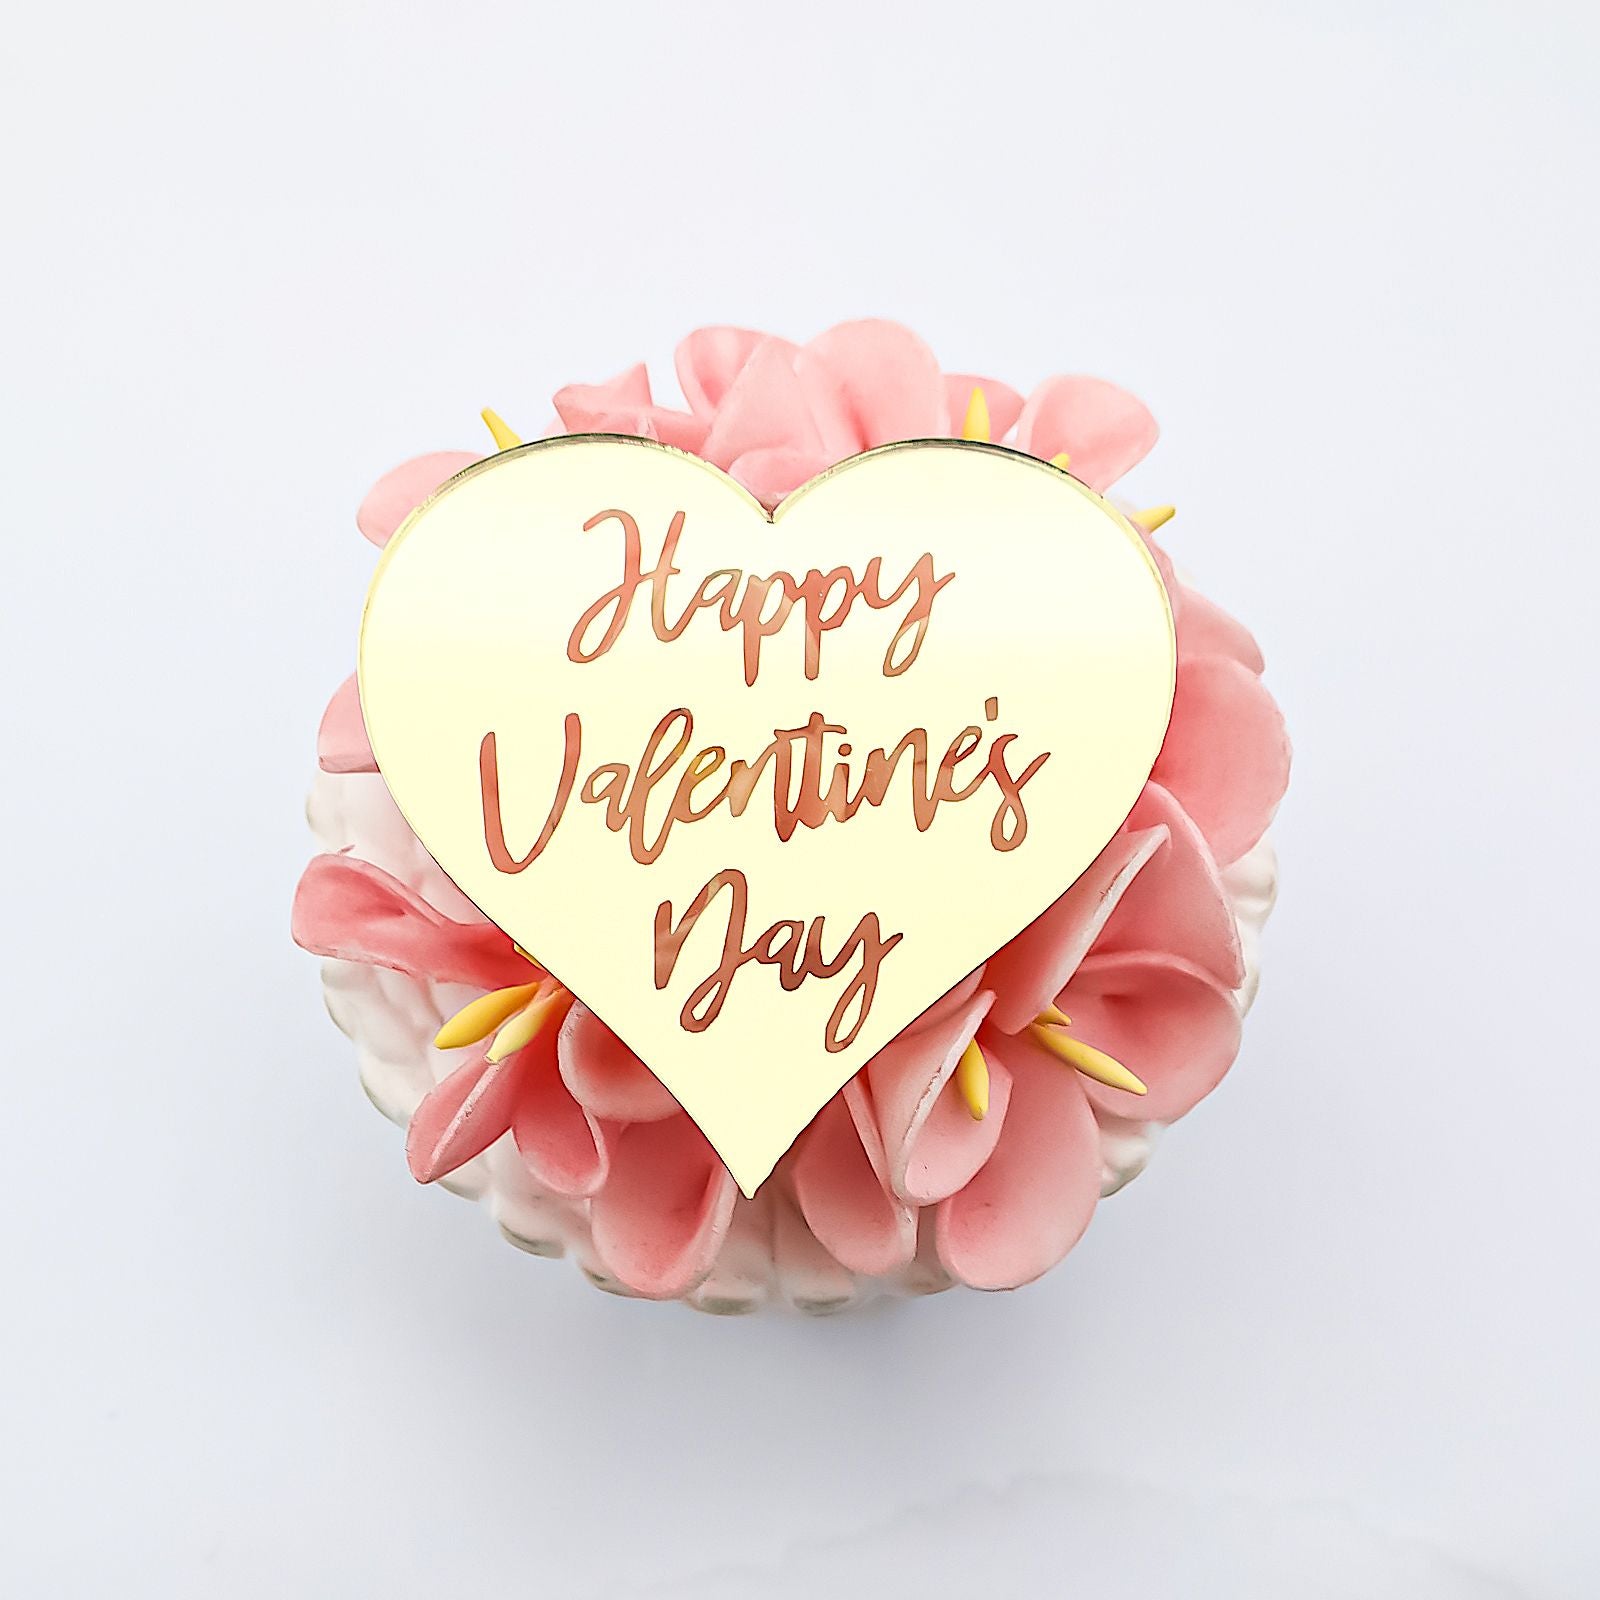 12 Valentine's Day Acrylic Cupcake Toppers Heart shaped Valentines toppers Love Valentine Toppers